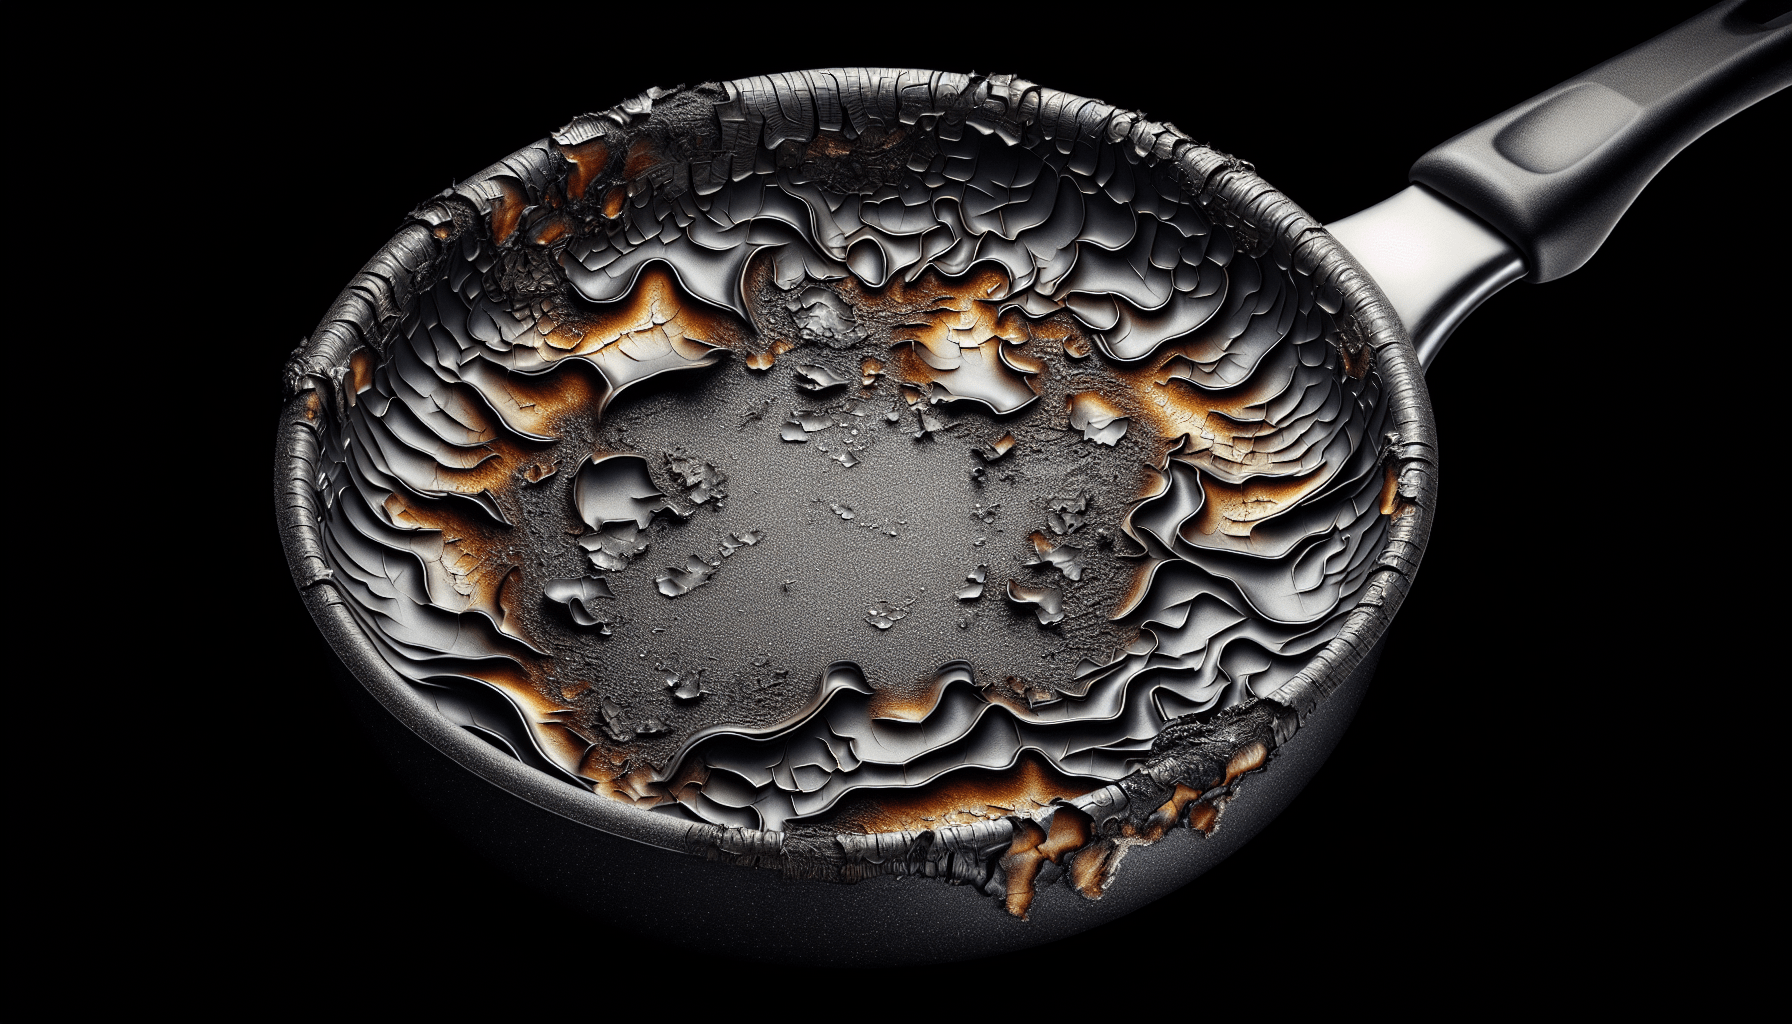 What Material Is Bad For Cookware?